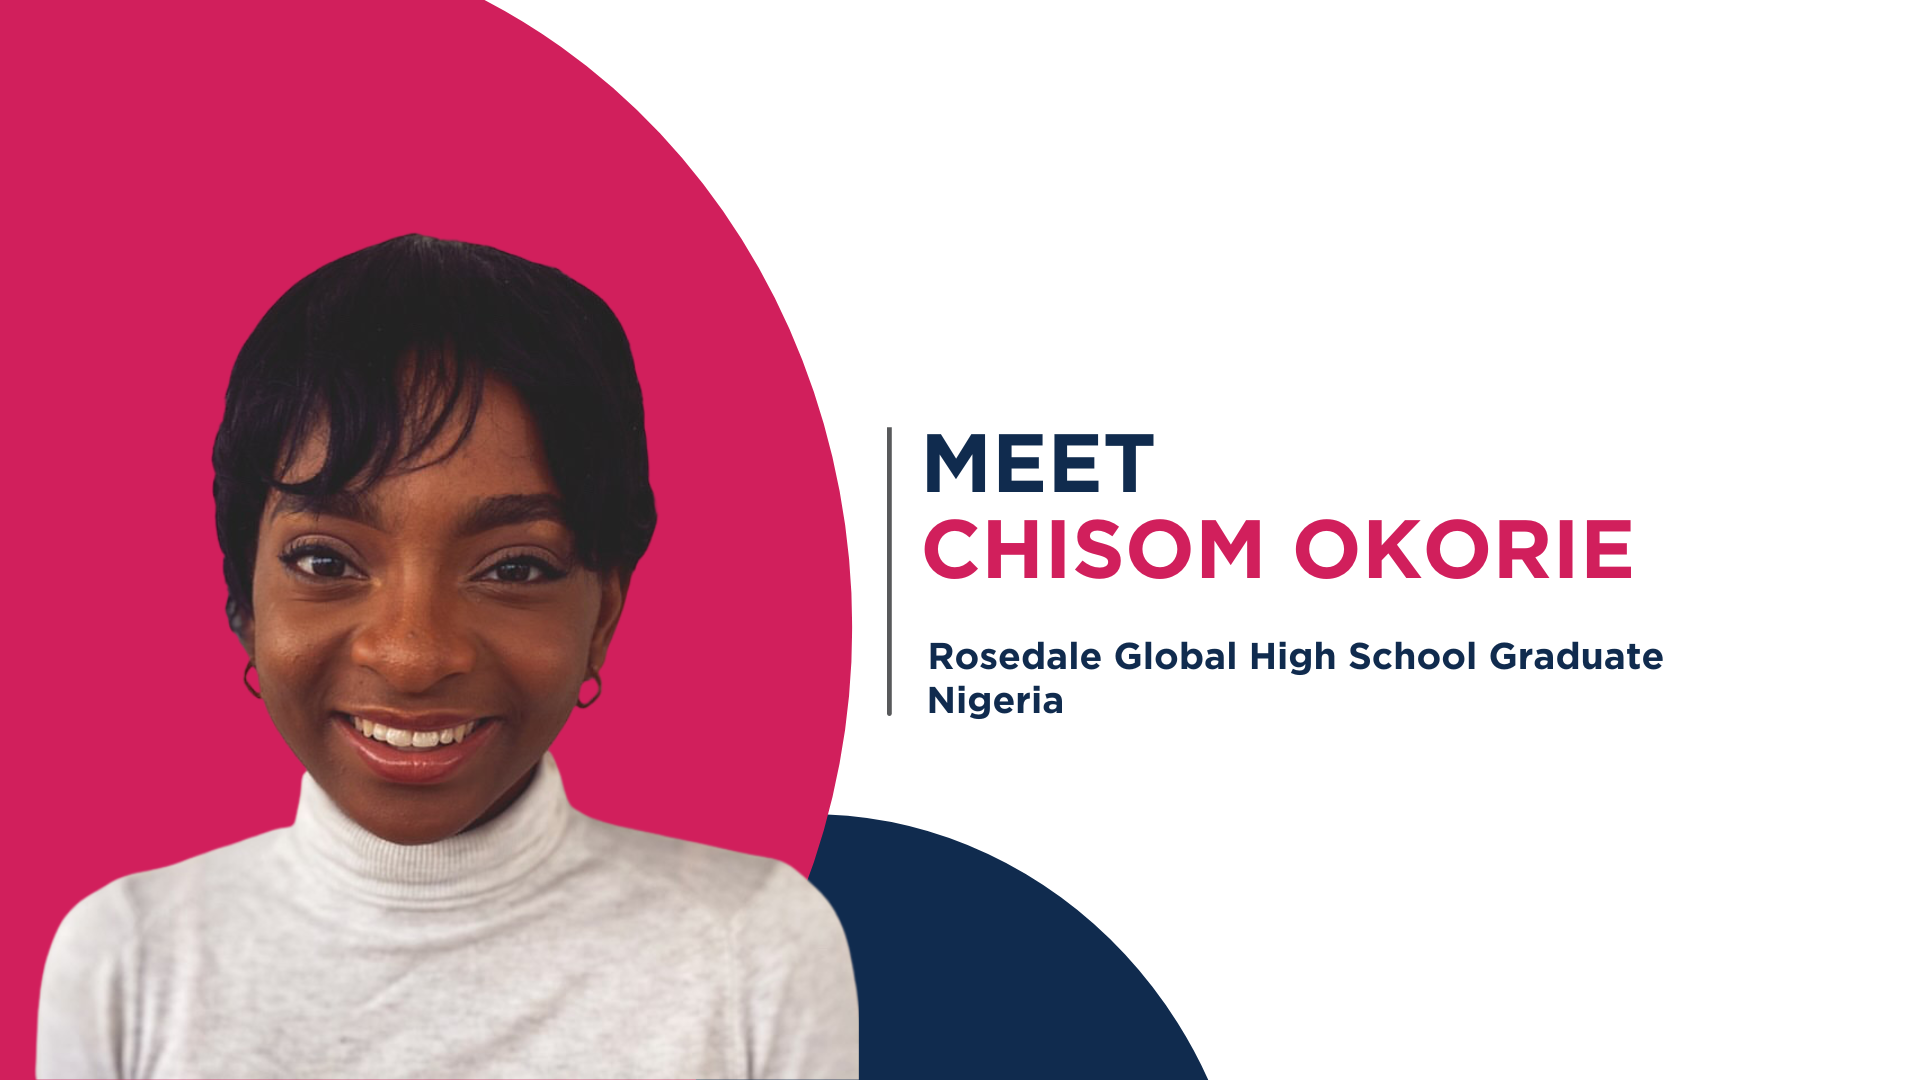 A Rosedale Global High School alum reflects on her transformation into an academically strong and capable university student